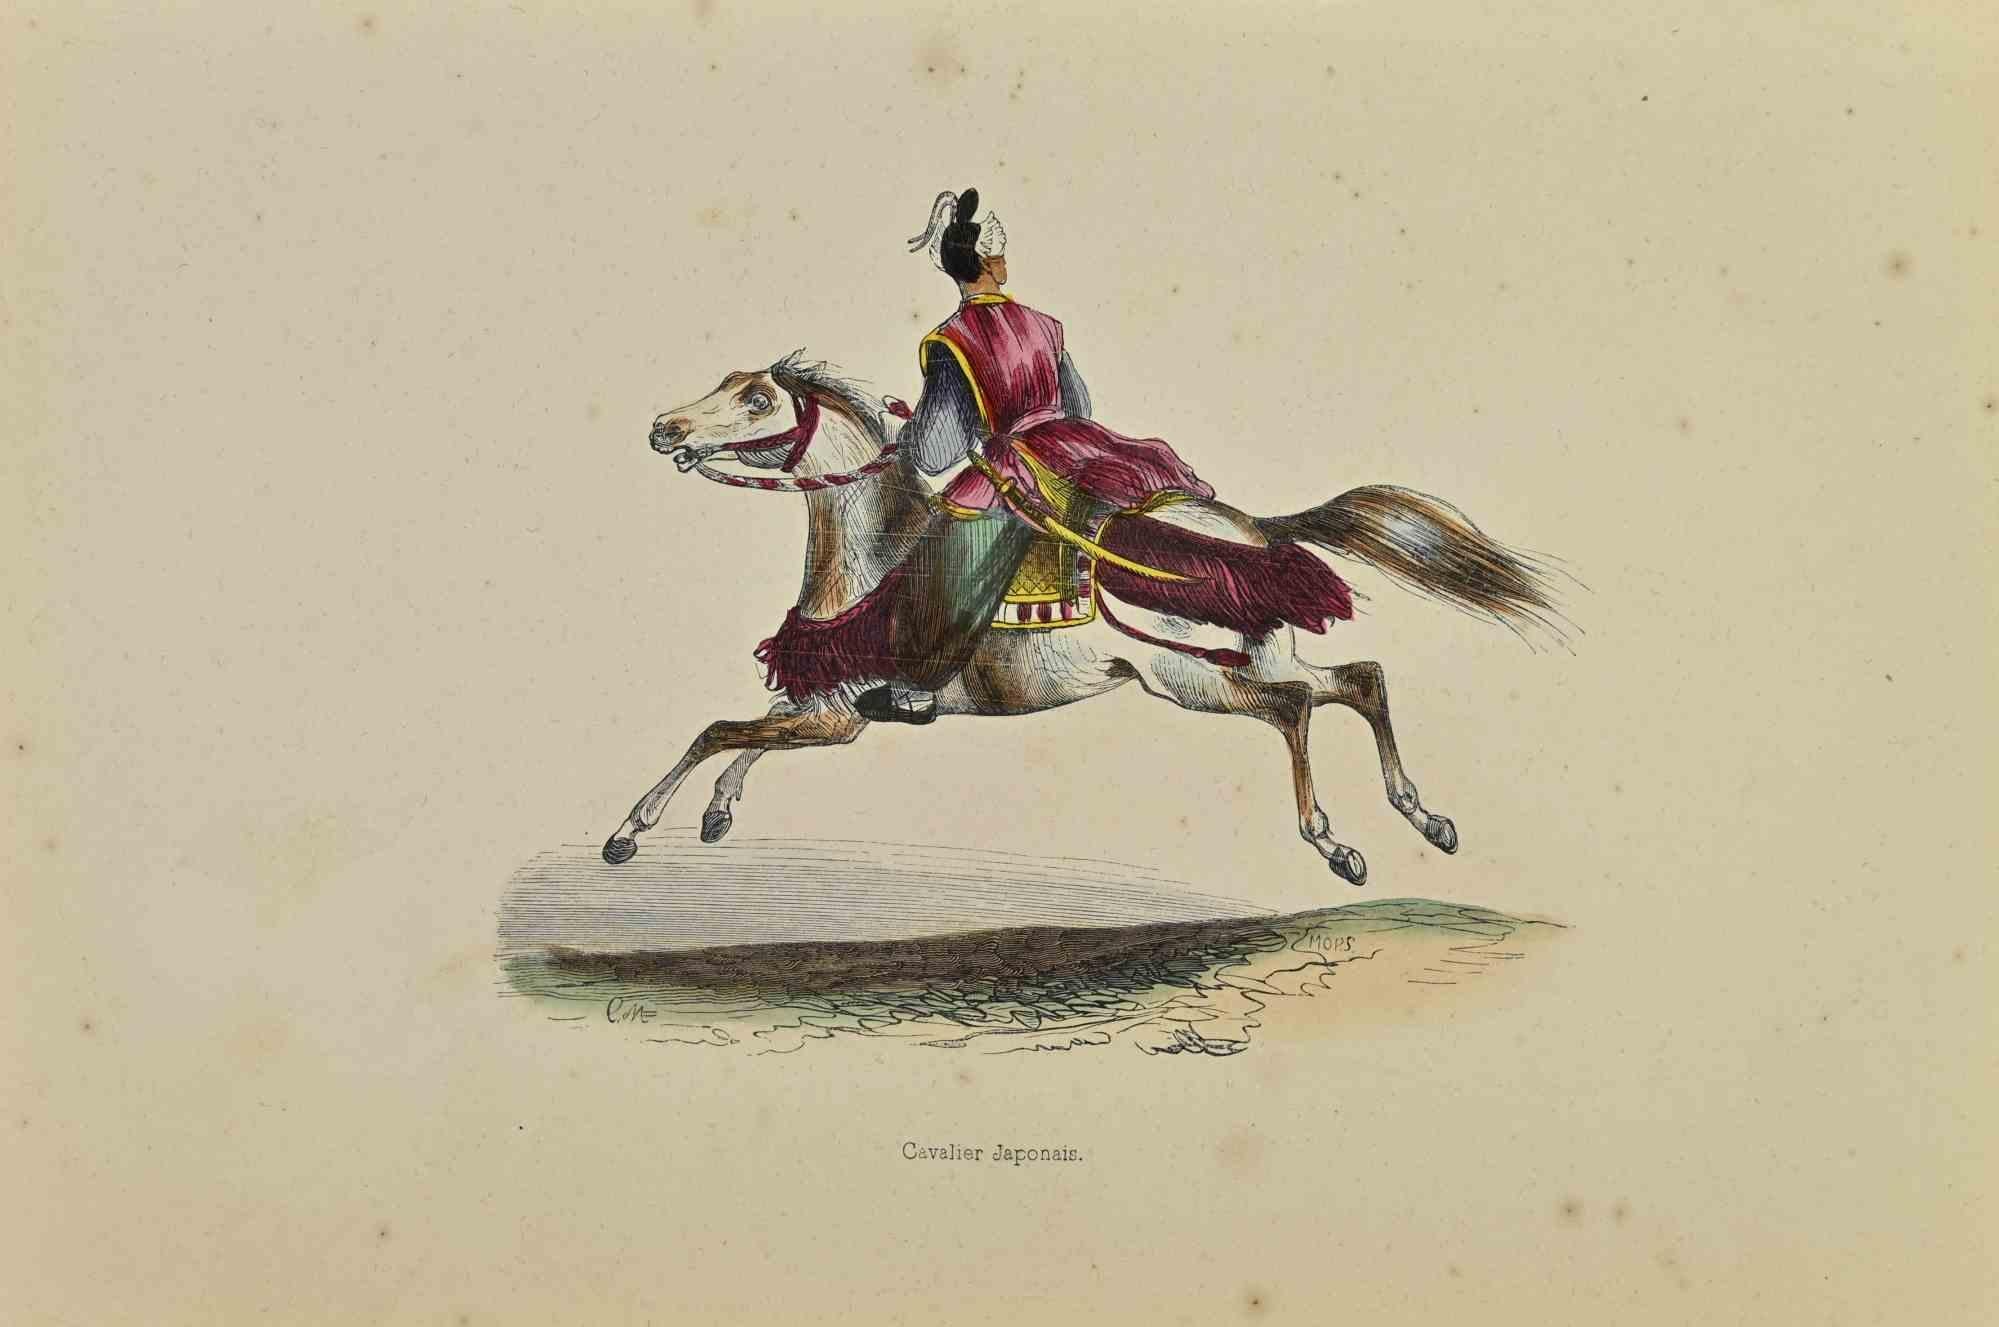 Japanese Rider is a lithograph made by Auguste Wahlen in 1844.

Hand colored. 

Good condition. 

At the center of the artwork is the original title "Cavalier Japonais". 

The work is part of Suite Moeurs, usages et costumes de tous les peuples du